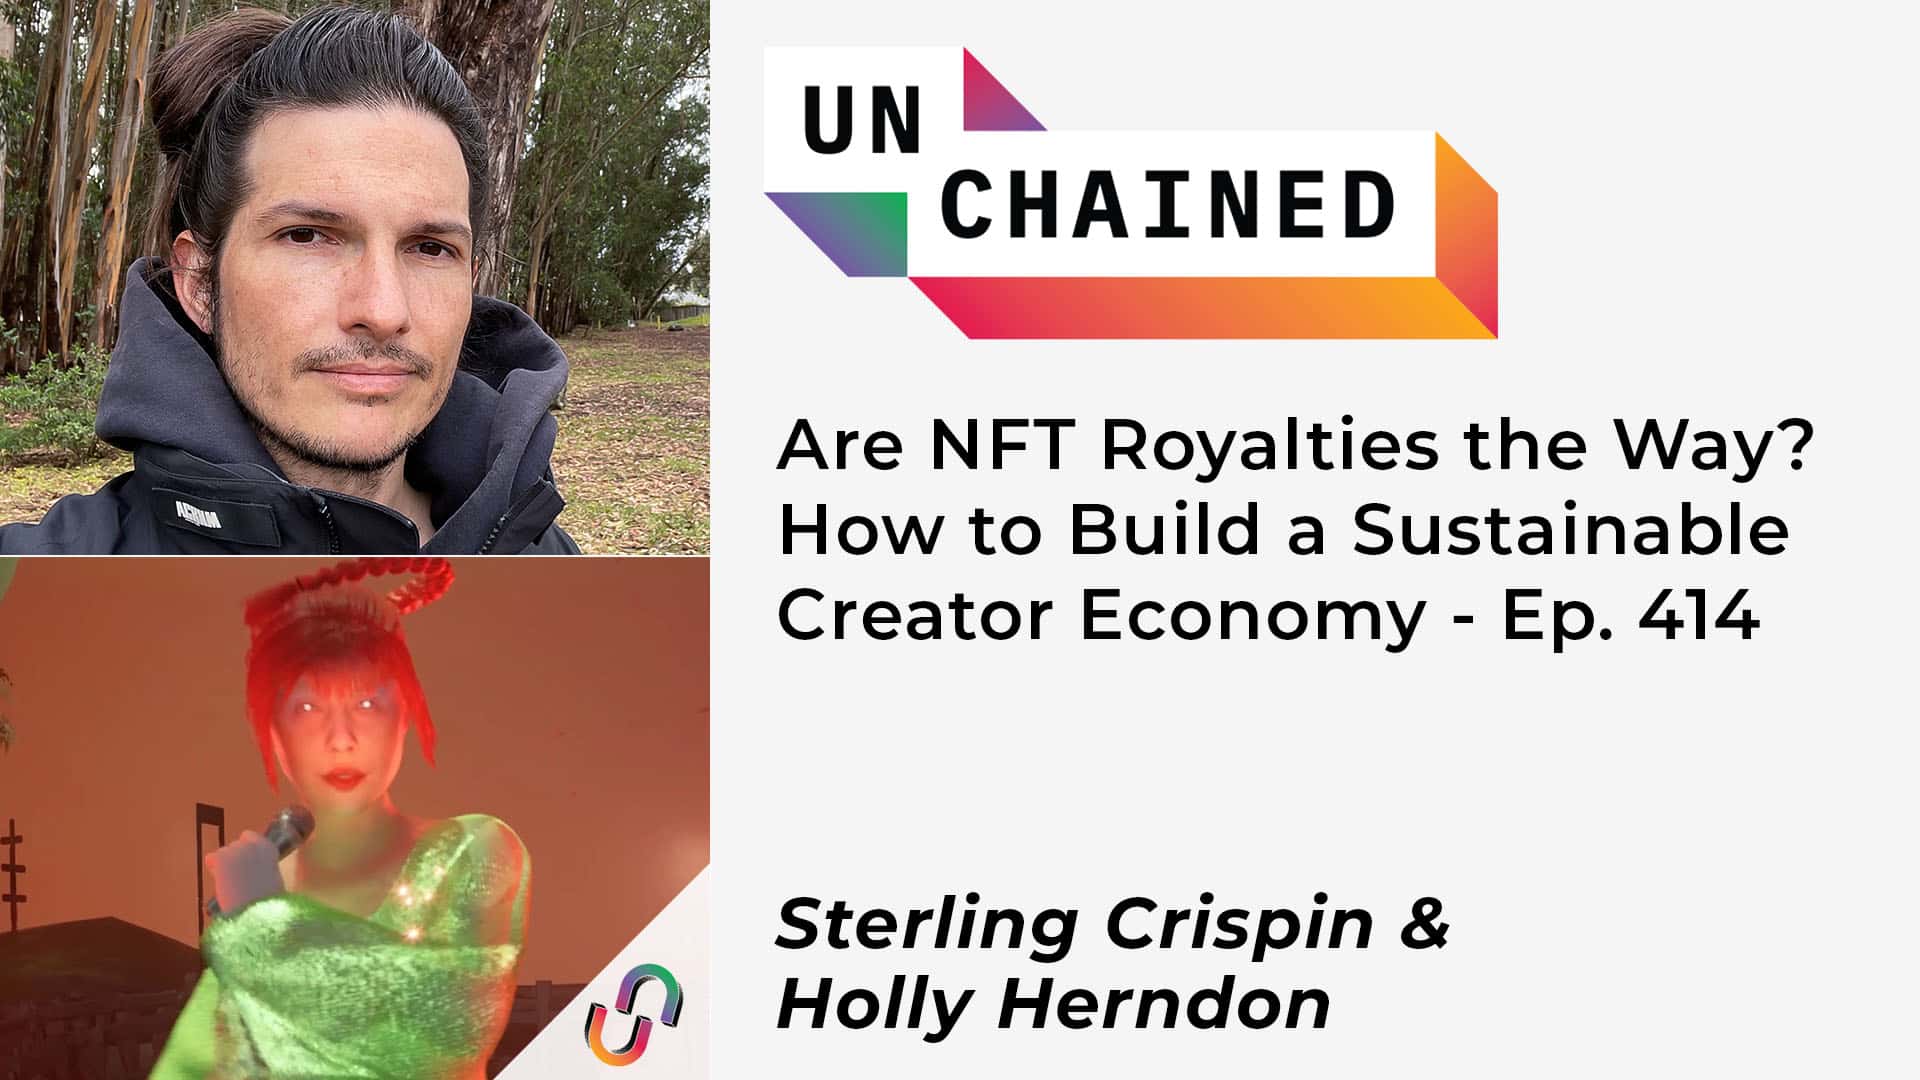 Are NFT Royalties the Way? How to Build a Sustainable Creator Economy - Ep. 414